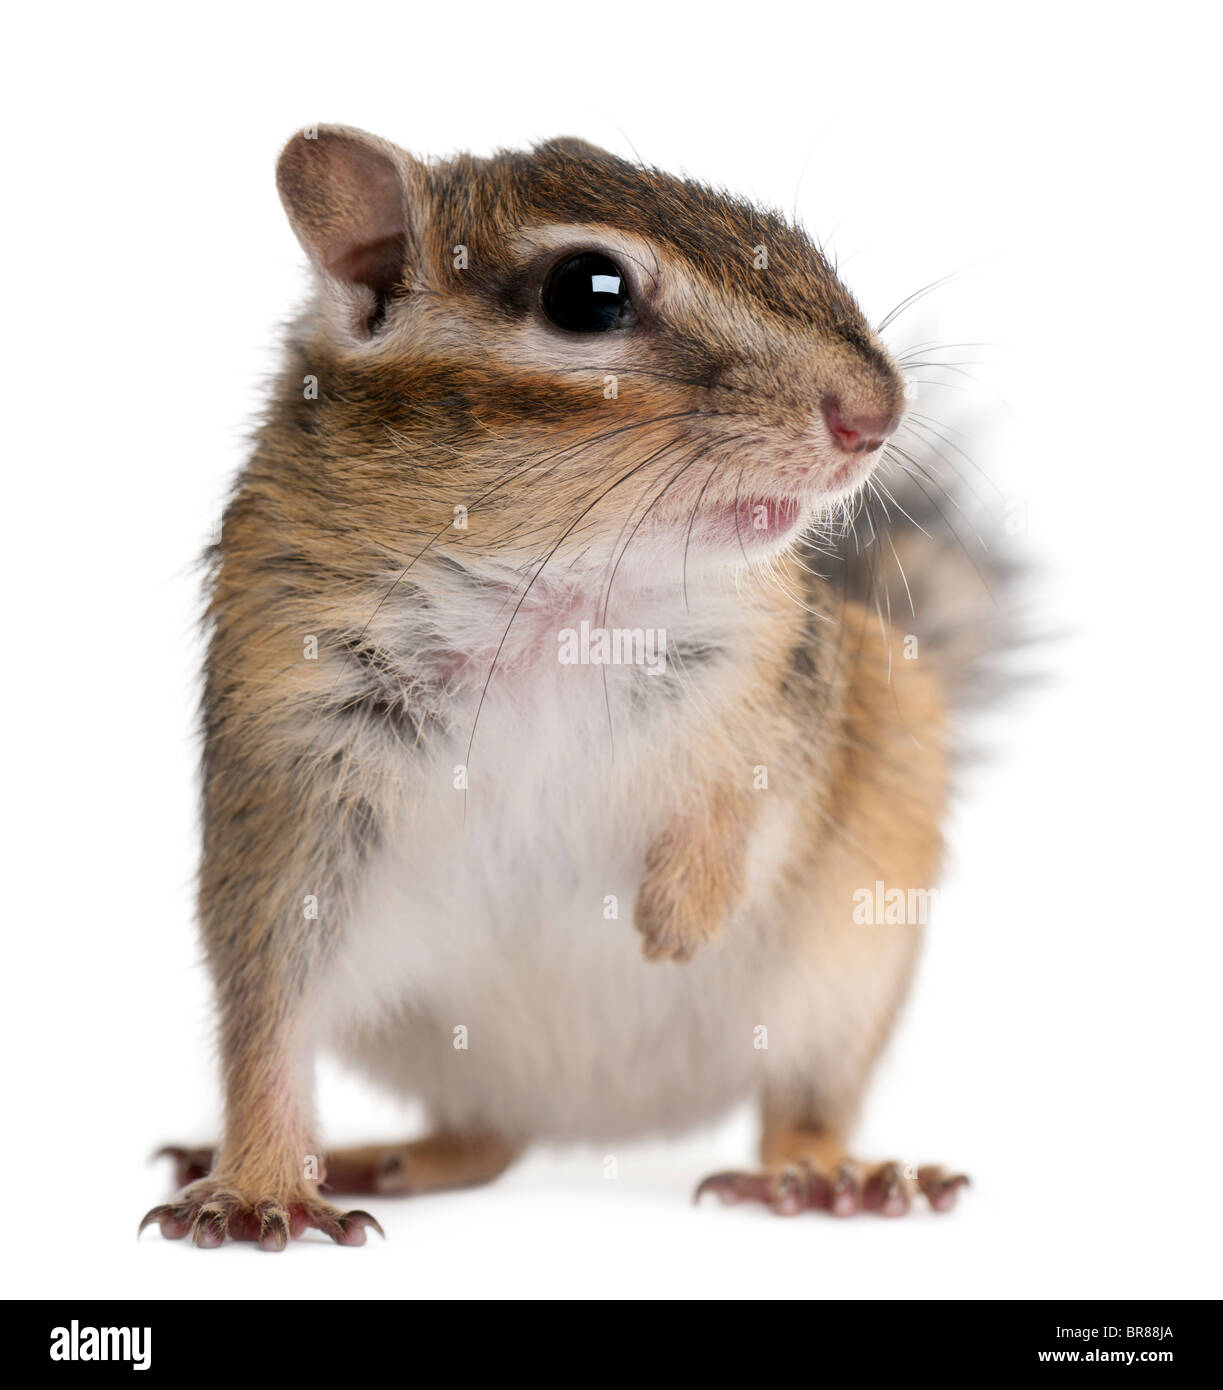 Close-up of a Siberian chipmunk, Euamias sibiricus, in front of white background Stock Photo